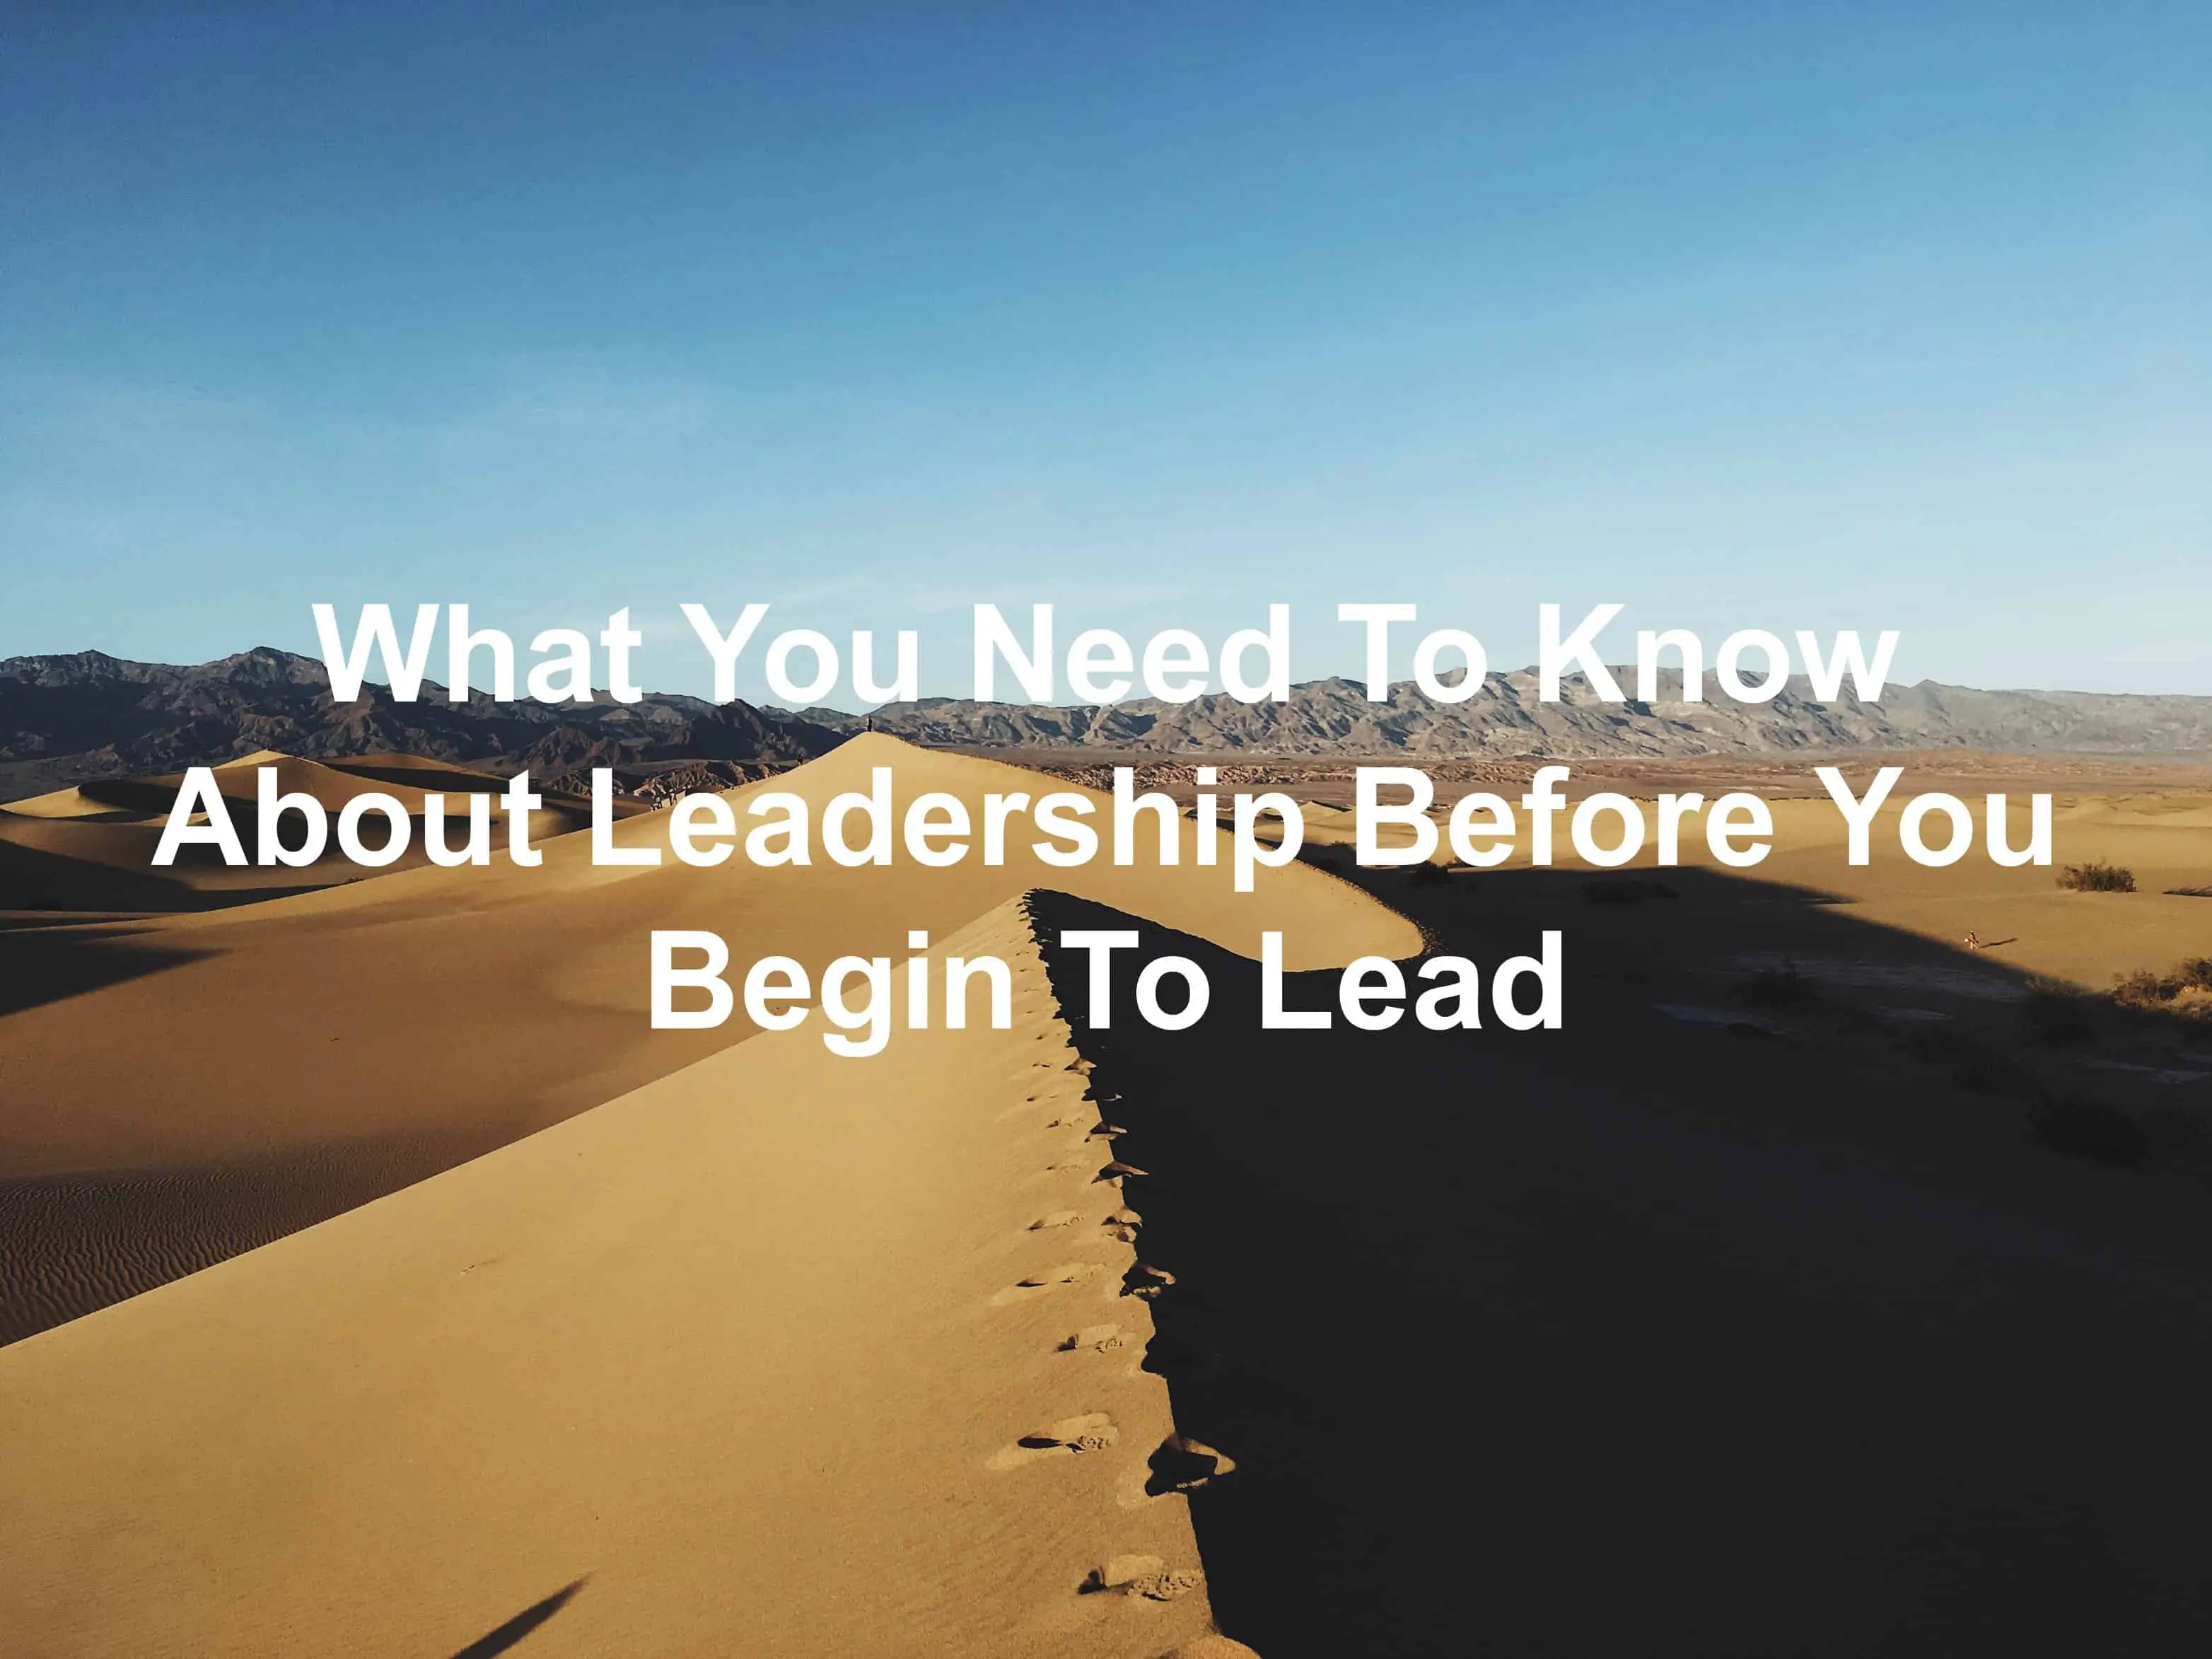 Leadership requires you to know these things